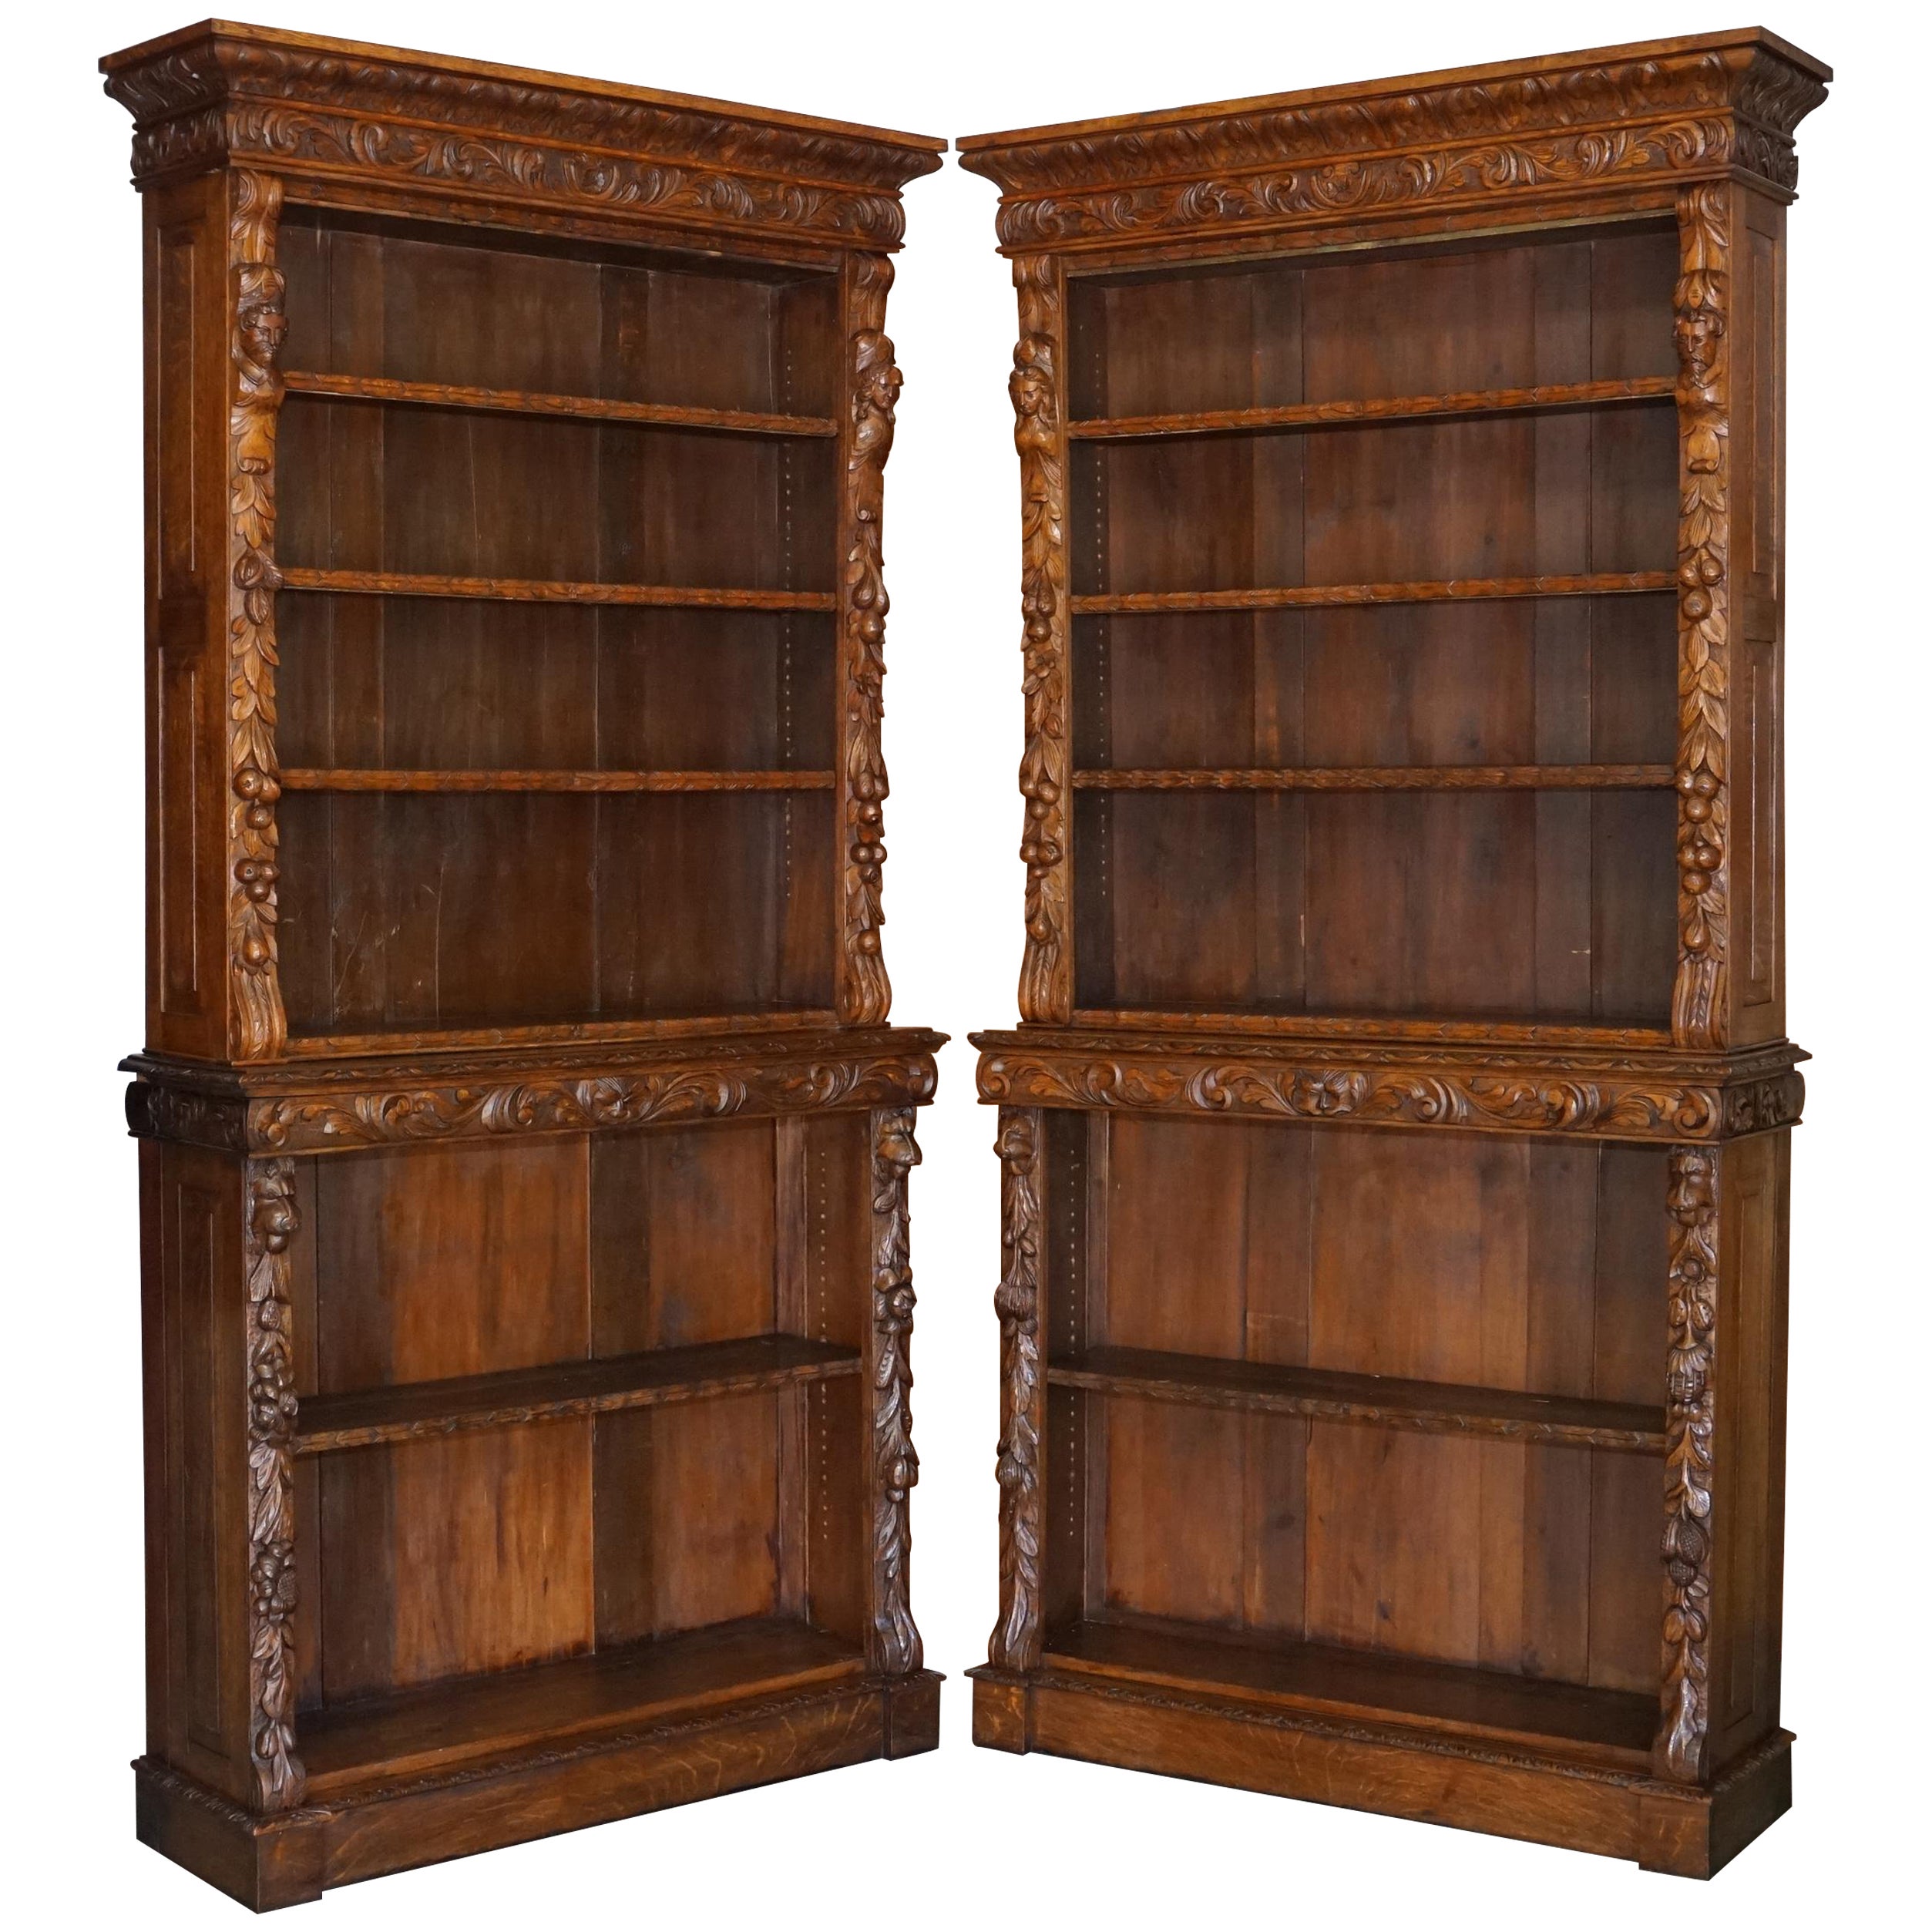 Antique Pair of circa 1860 Jacobean Revival English Carved Oak Library Bookcases